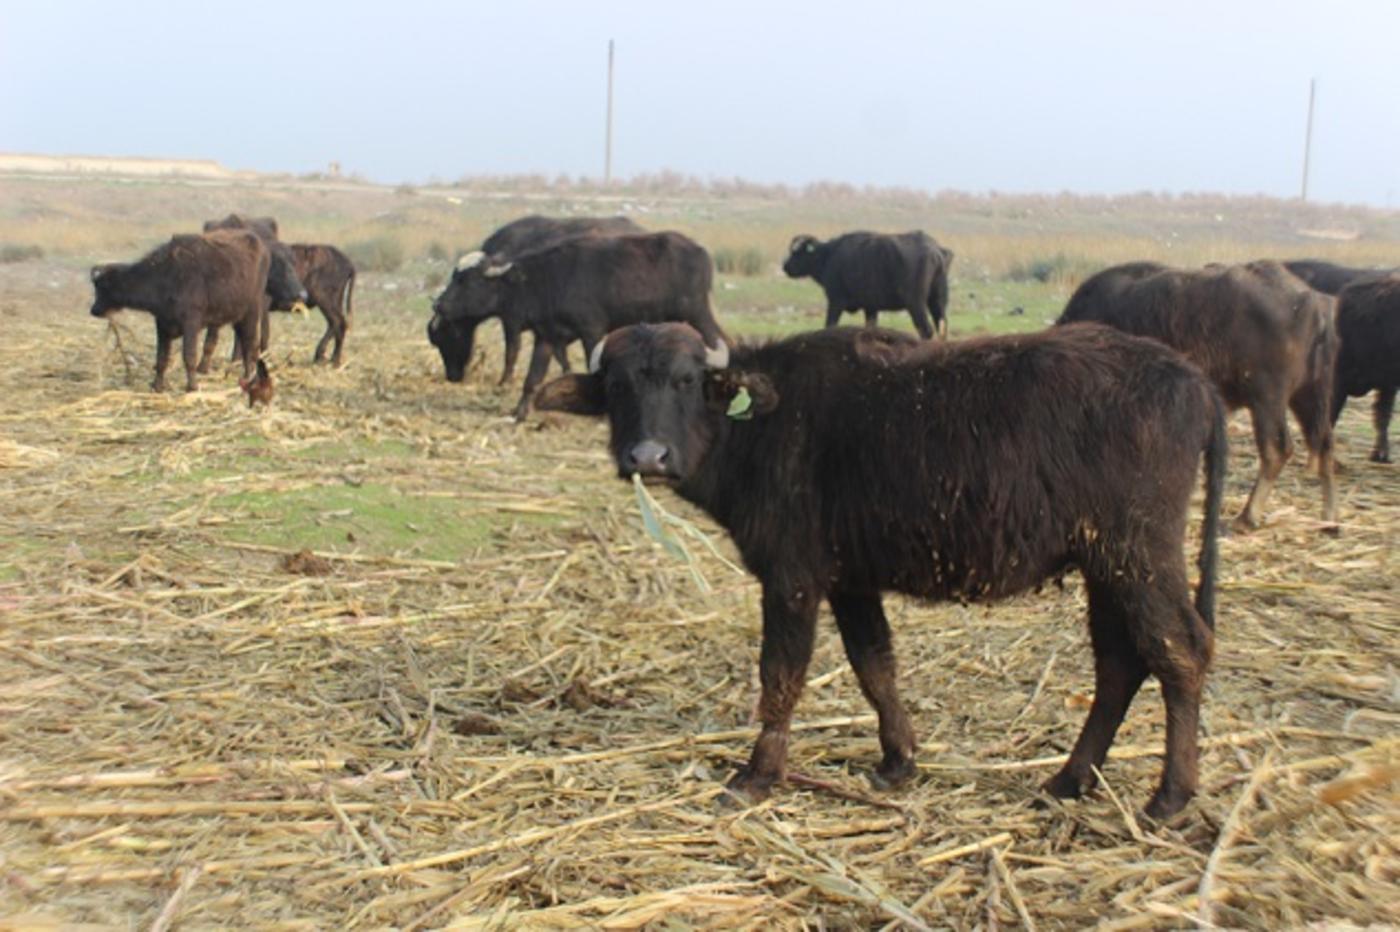 Where they no longer roam: Syria's disappearing water buffalo | Middle East